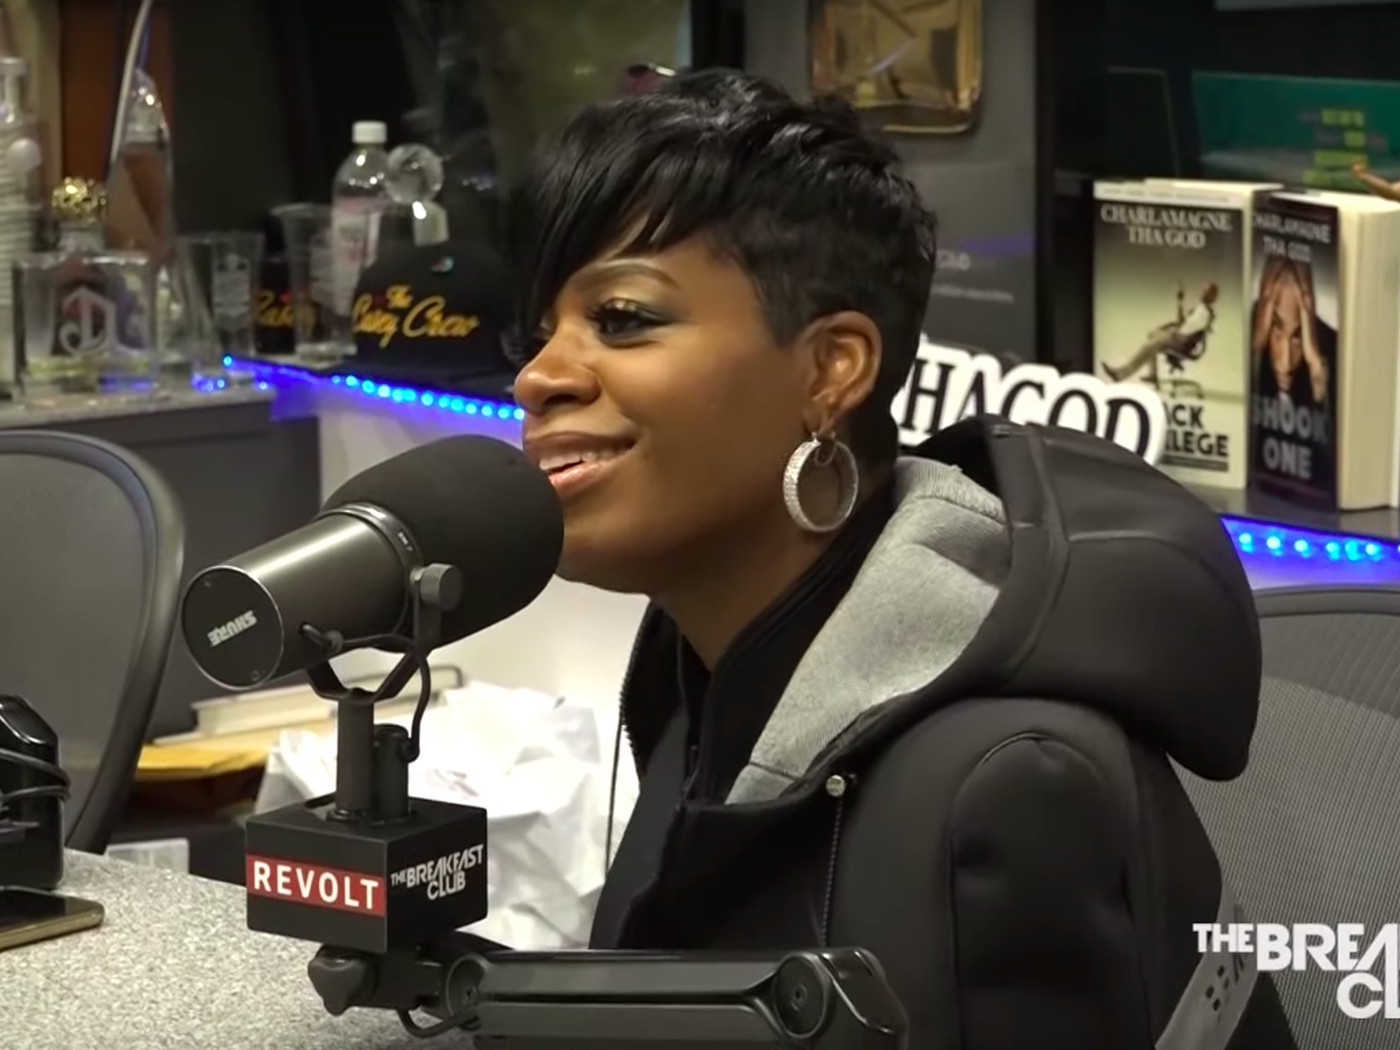 Fantasia Thinks Women Need To Submit: “That’s Why You Can’t Find A Man”